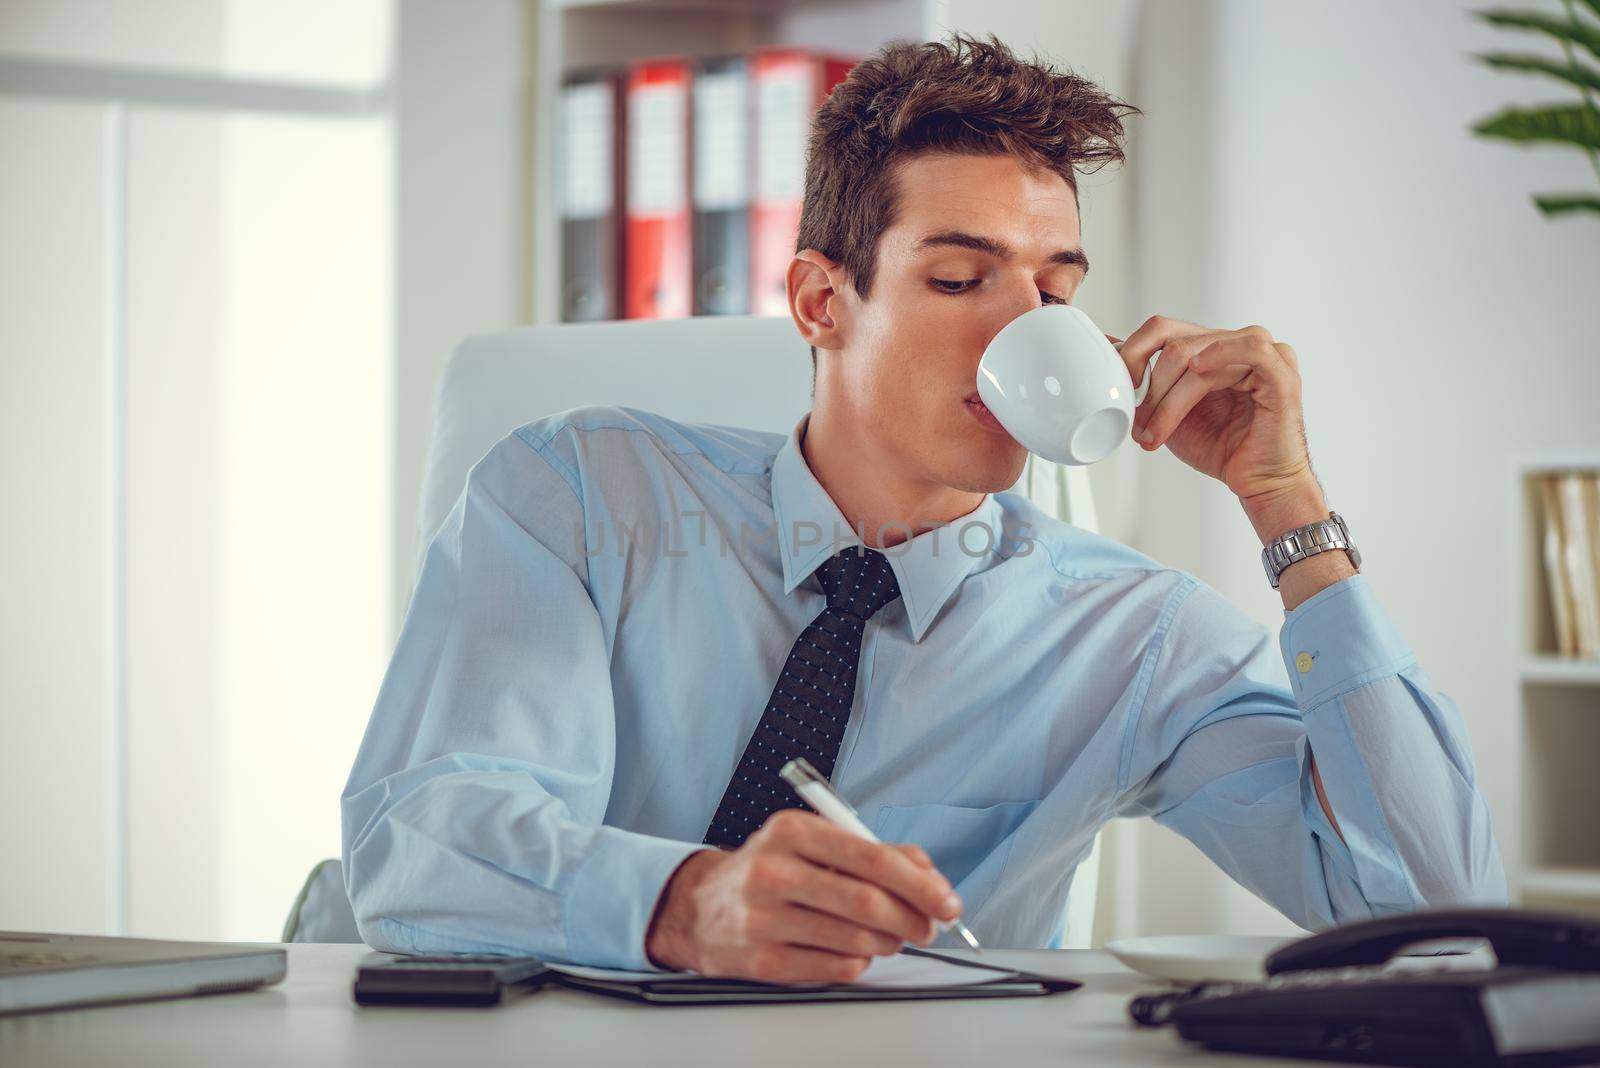 Executive male working at desk looking at documents and accounts. He is drinking coffee, holding a pen and looking concentrated and serious